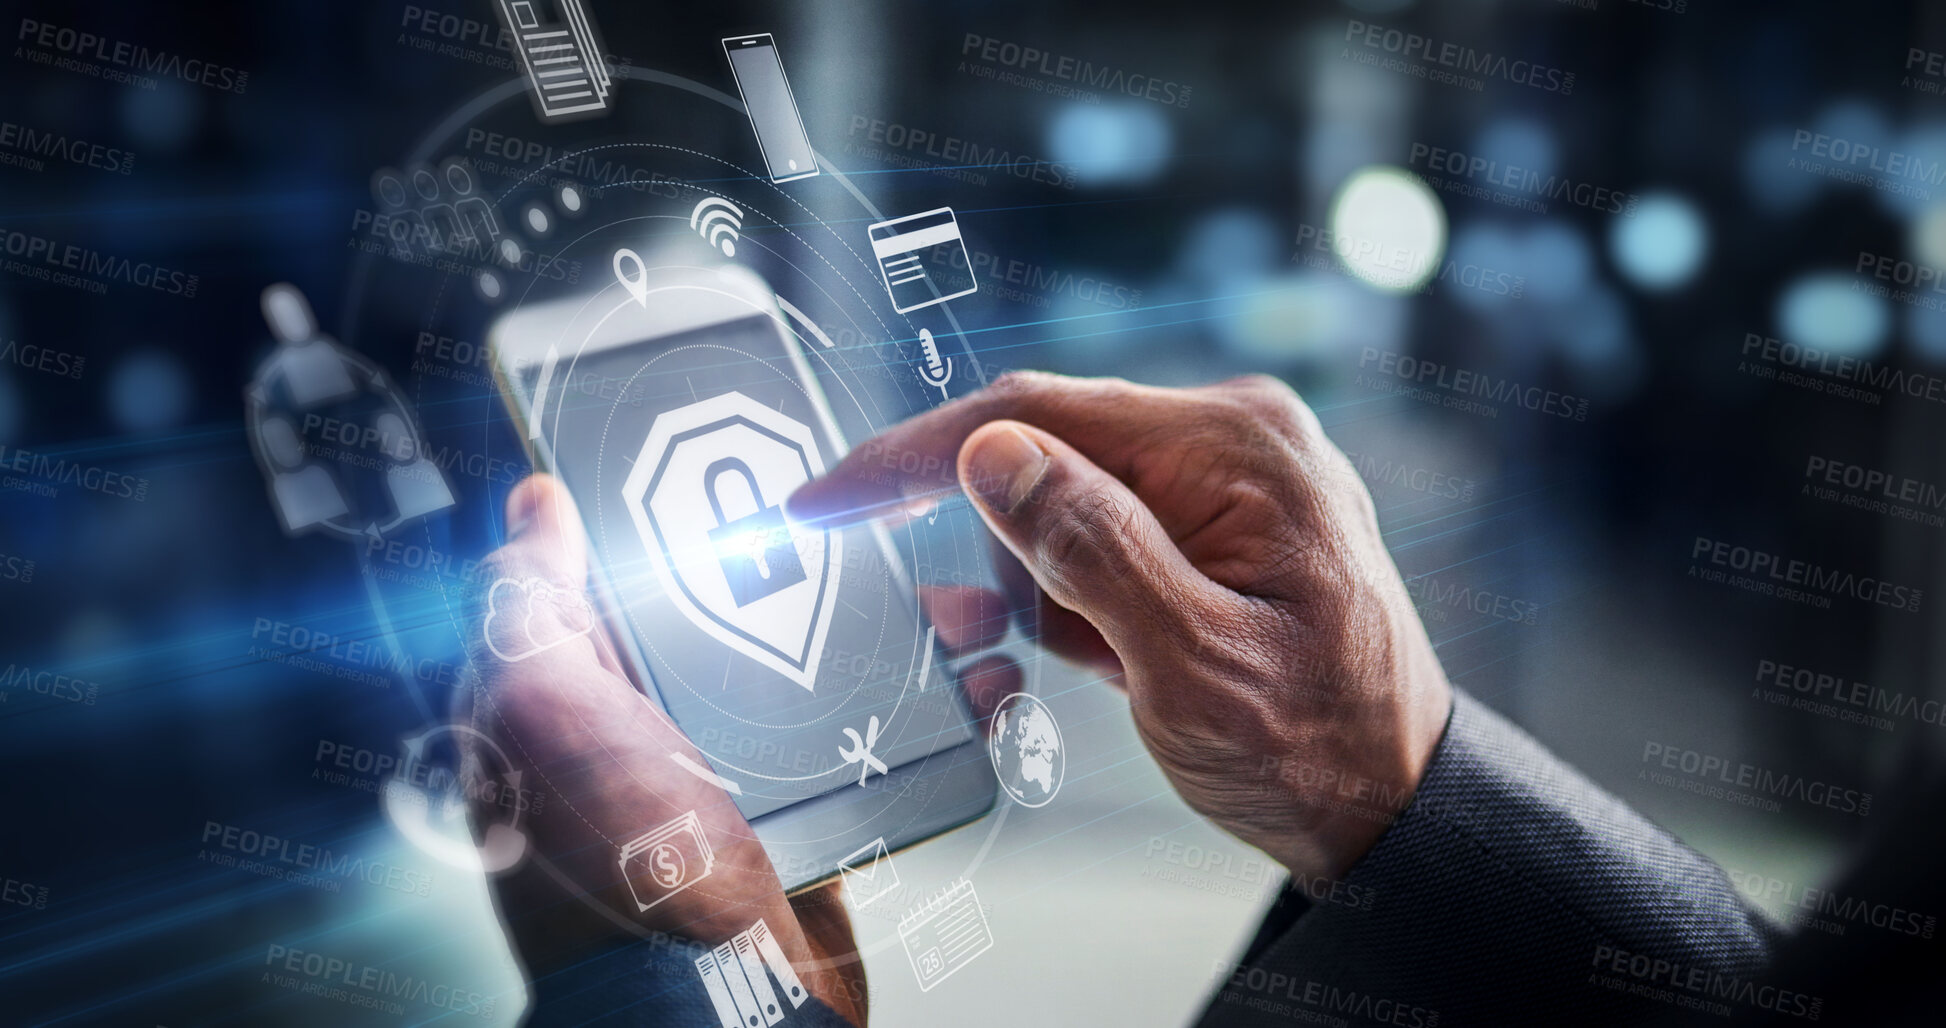 Buy stock photo Hands, phone and digital transformation for cybersecurity, mobile app or technology icons at night. Hand of person on futuristic smartphone, lock screen or biometrics in big data or virtual IoT